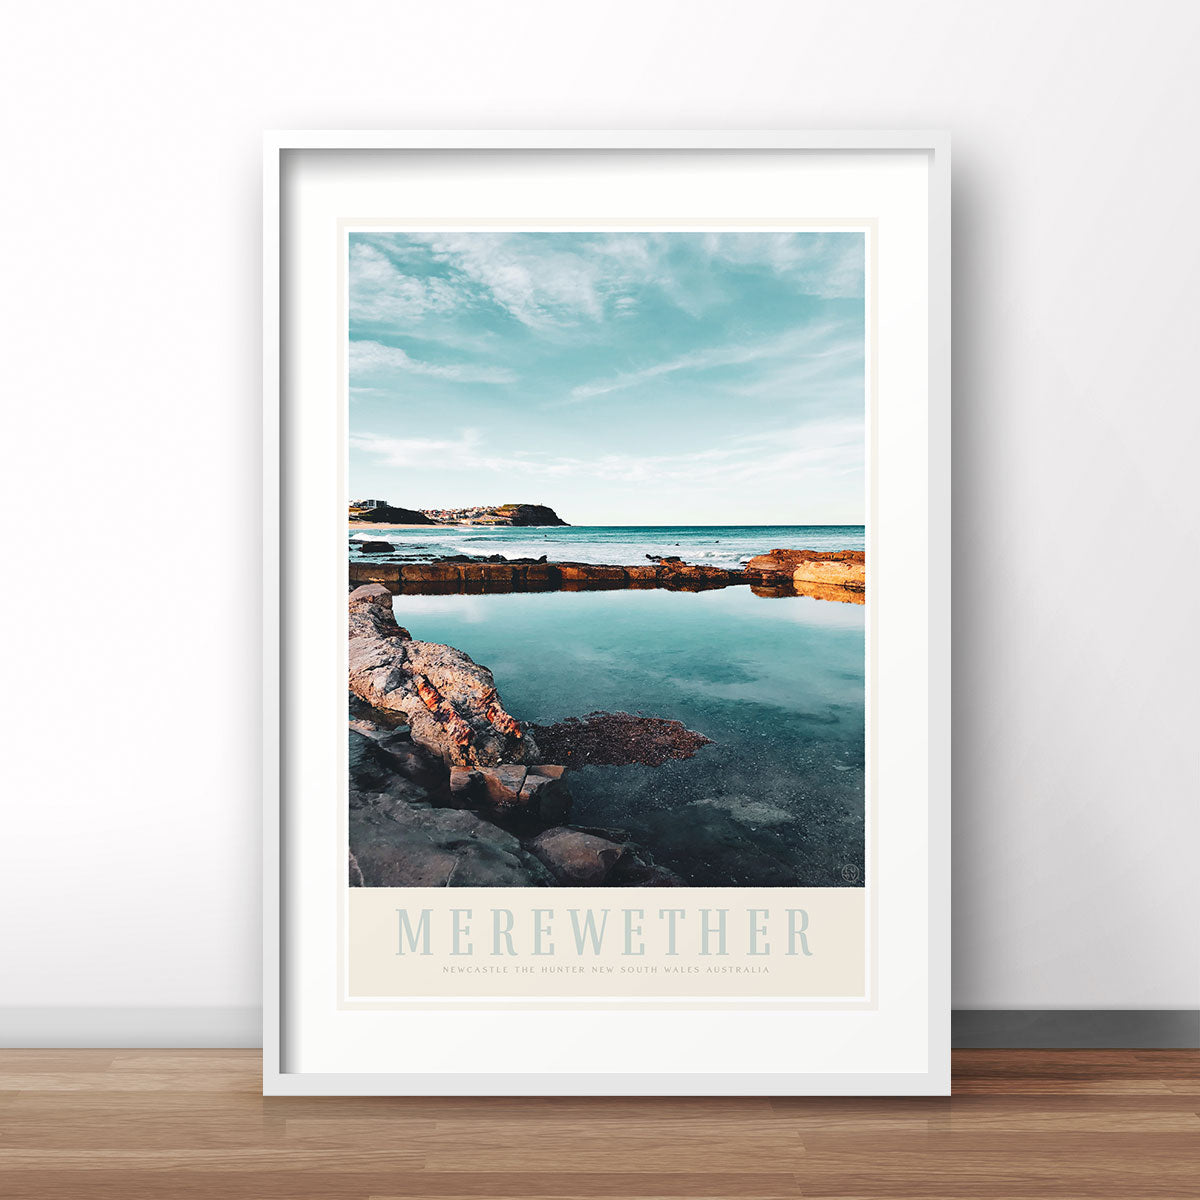 Merewether Beach vintage retro travel poster print from Places We Luv